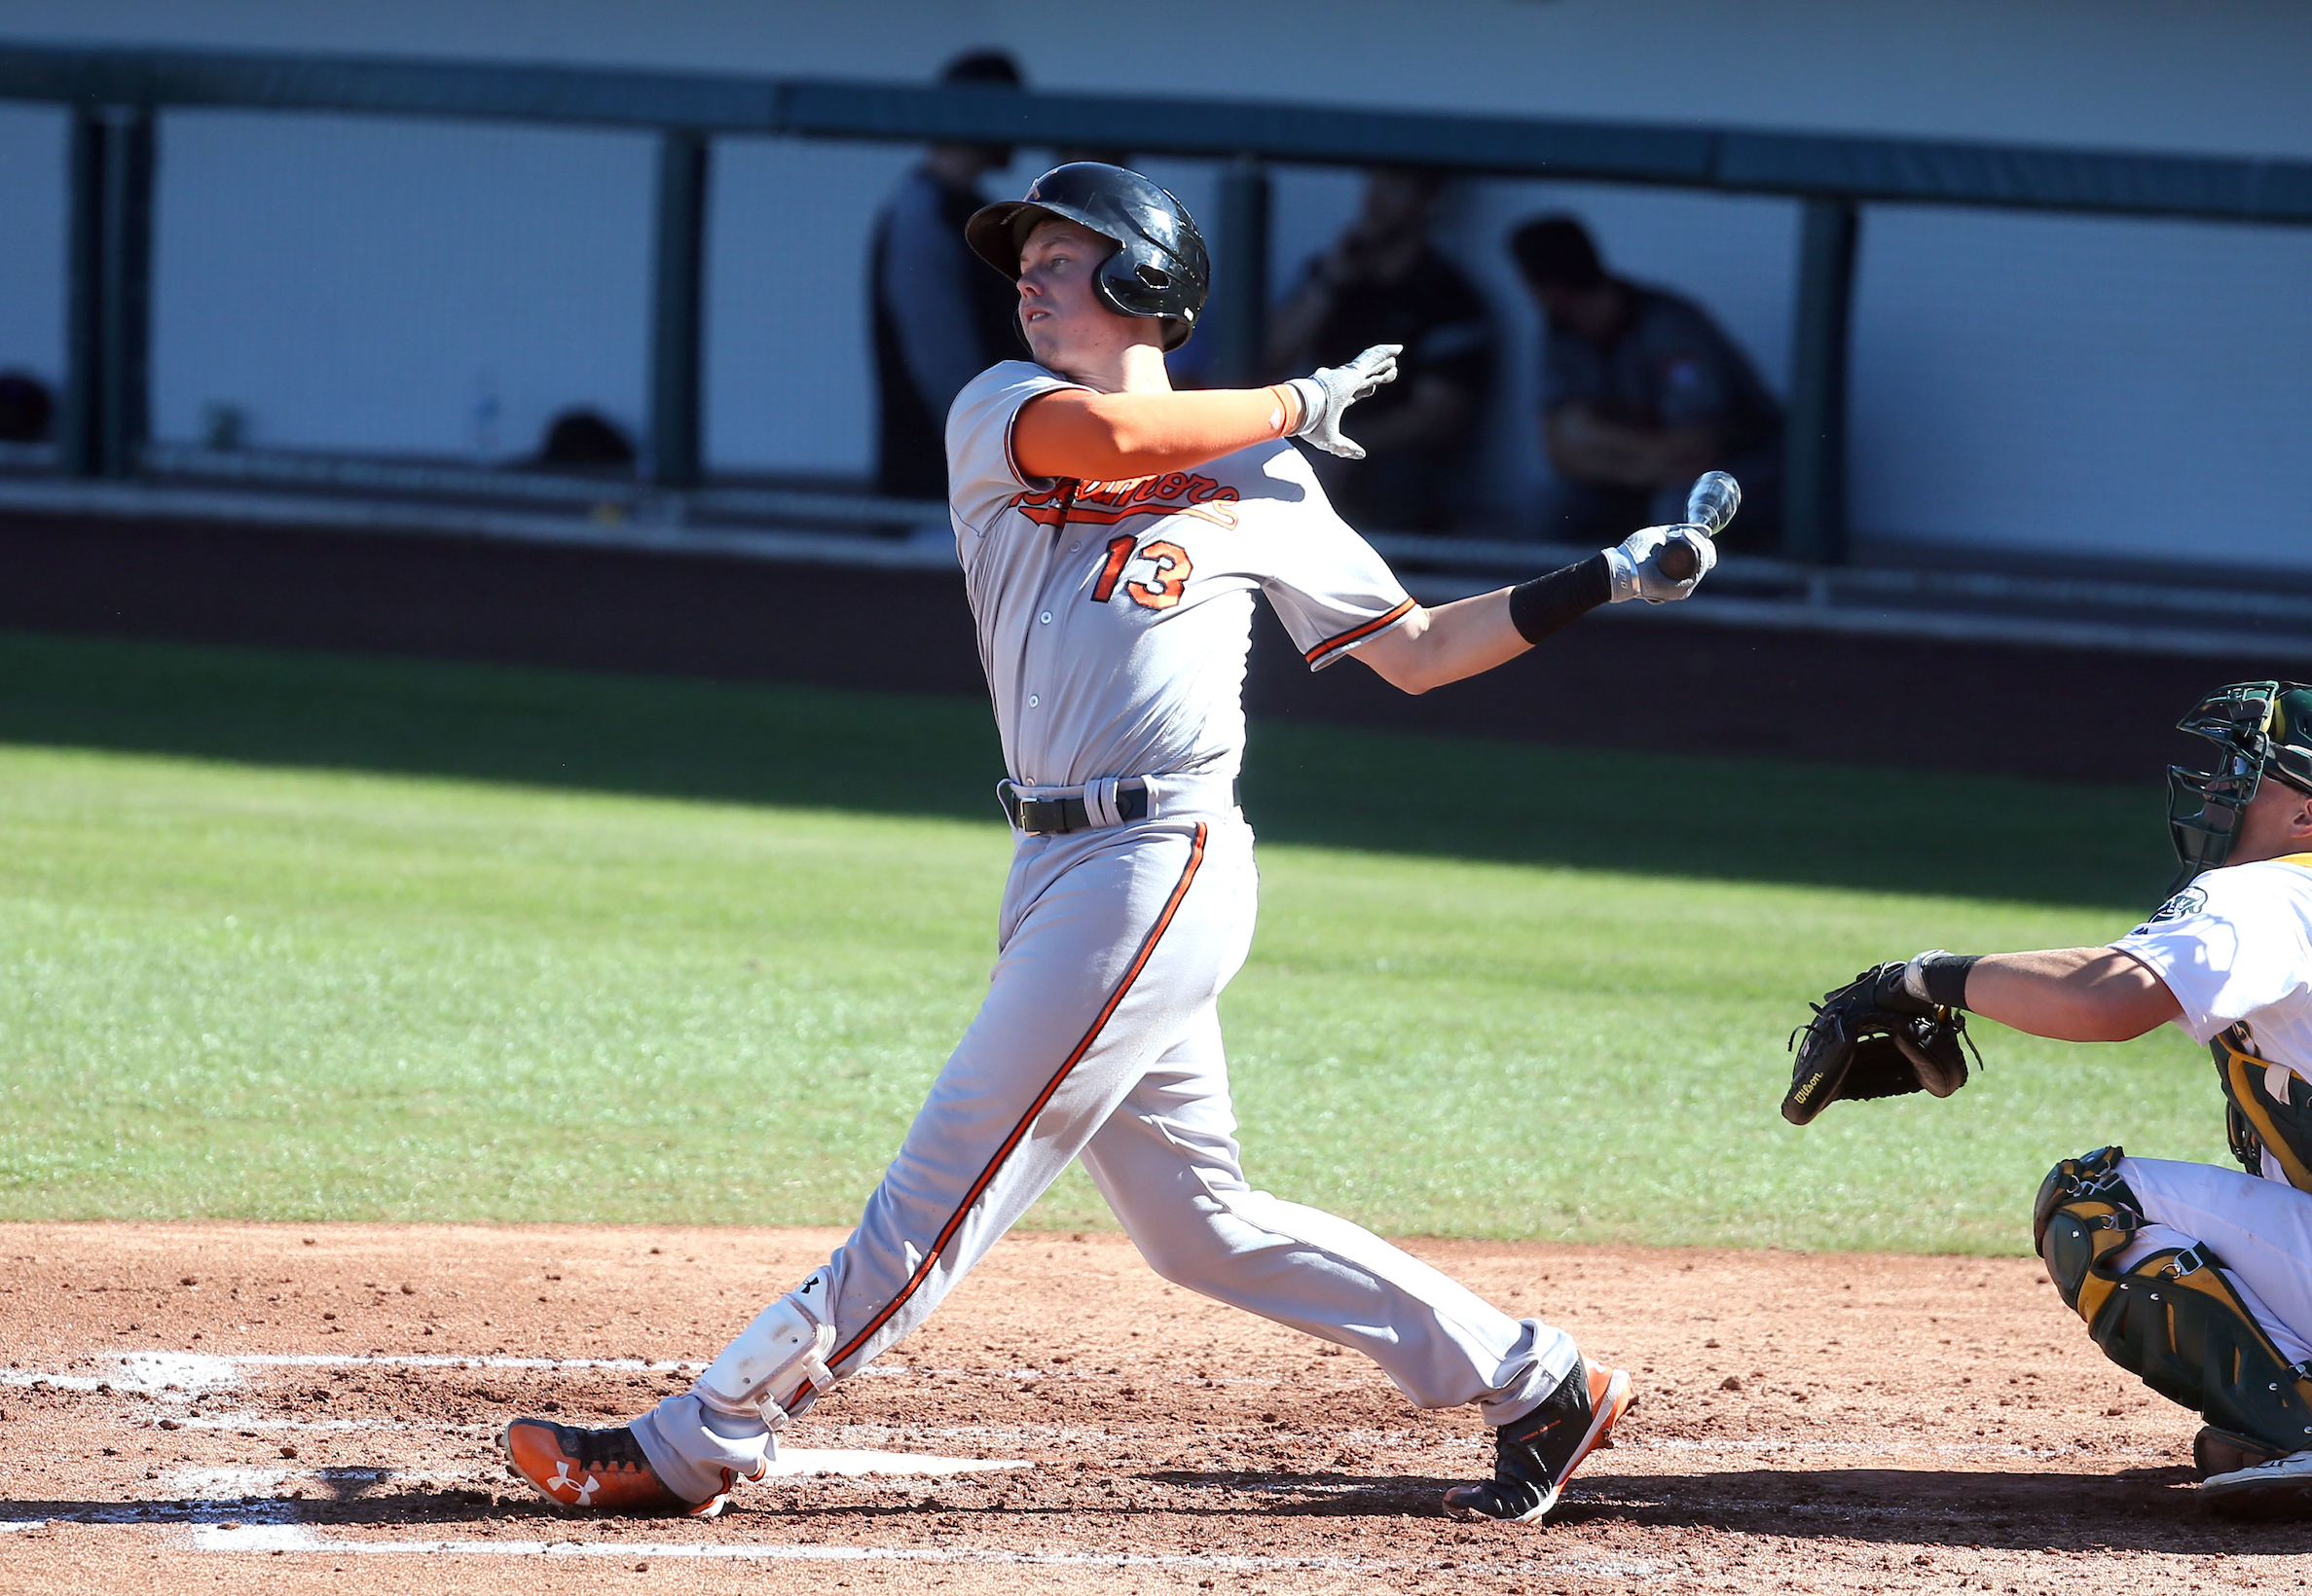 2019 Prospects Baltimore Orioles Top 10 Prospects